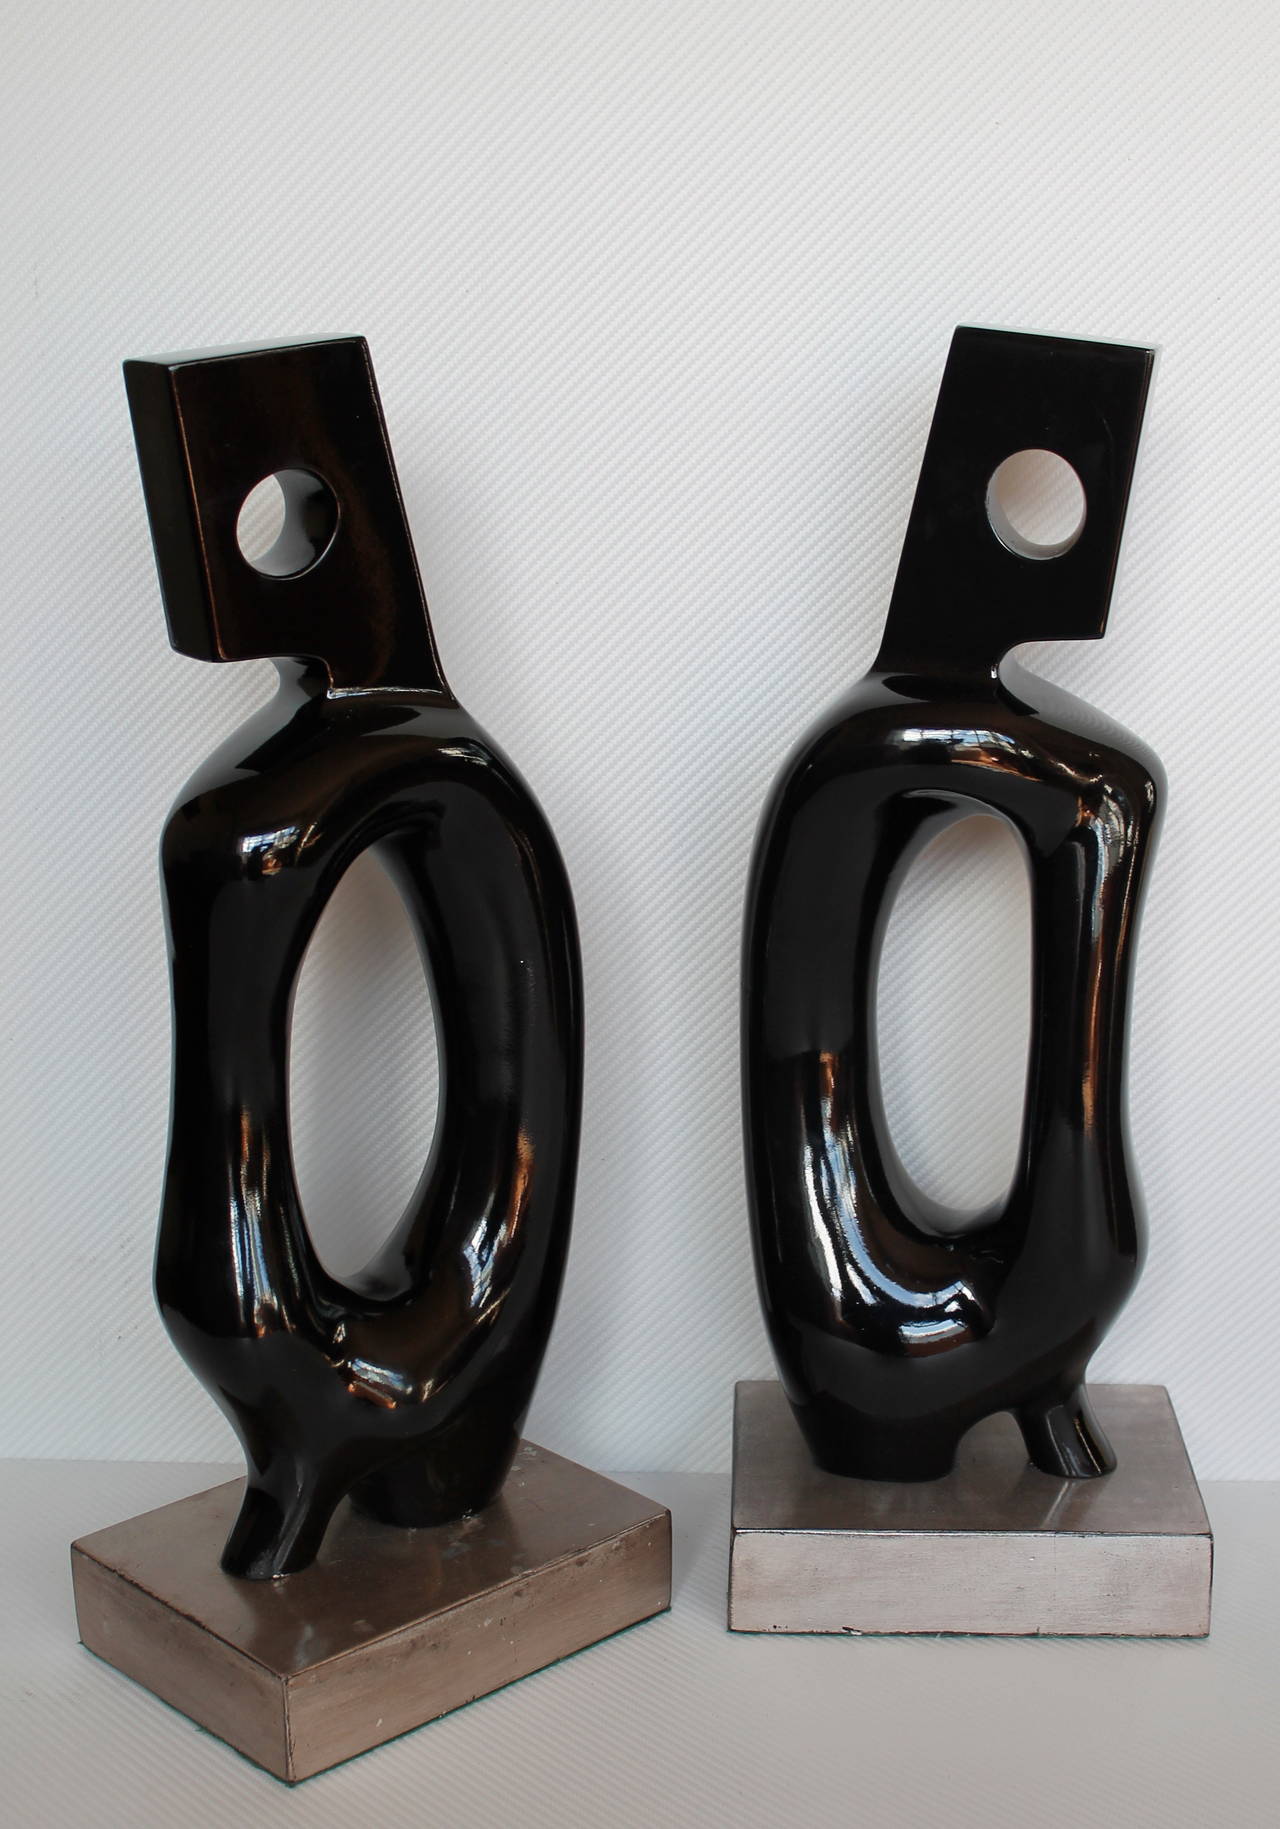 Set of two biomorphic organic carved lacquered wood sculptures.
Wood bases covered in metal leaf, 
Mexico, circa 1960s. Unsigned (unknown artist.)